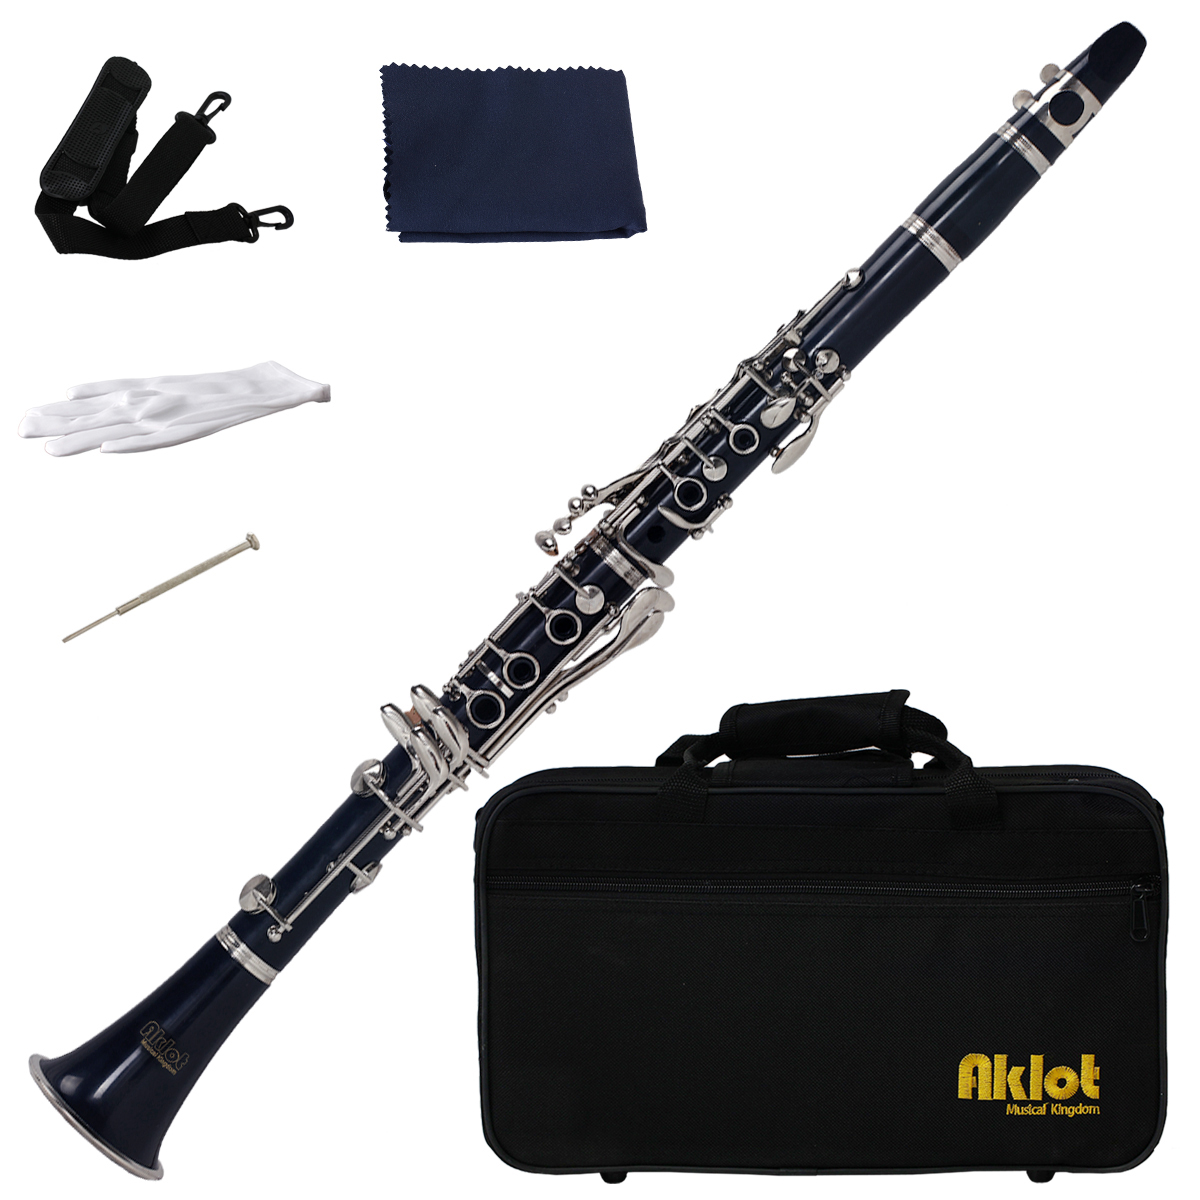 Aklot Bb Beginner Clarinet 17 Keys with Durable Dark Blue ABS Body with Reed Best for Student